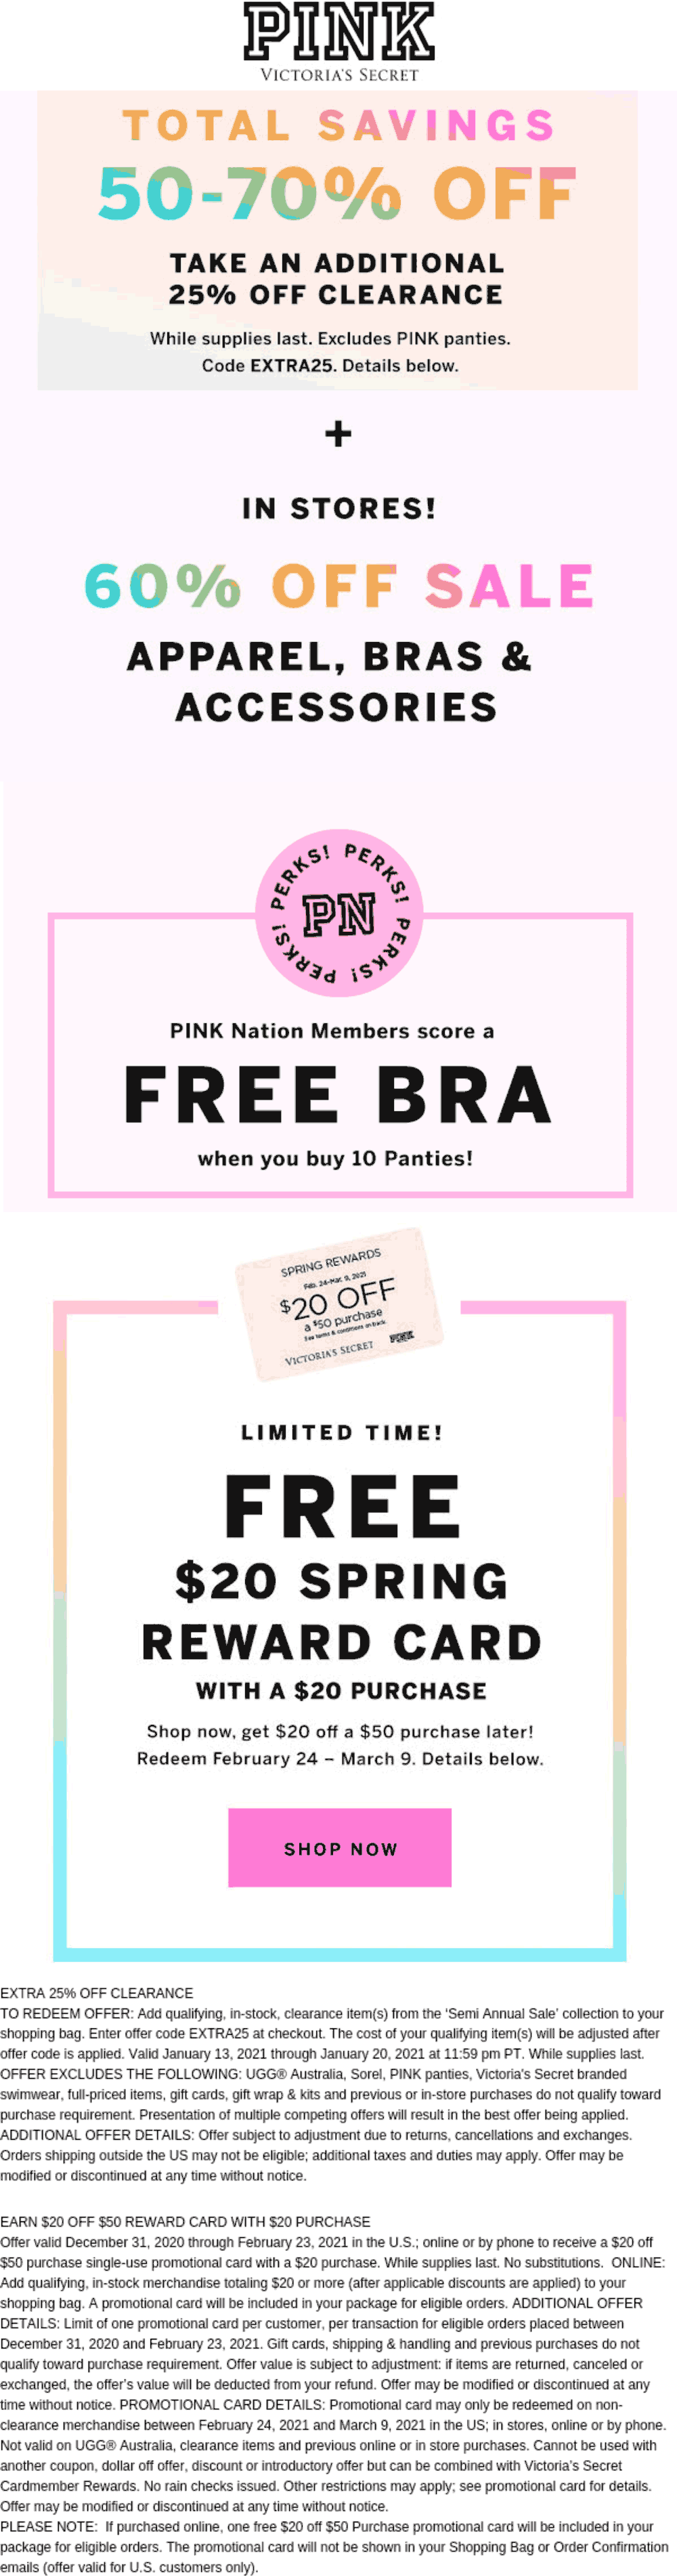 PINK stores Coupon  Extra 25% off clearance at Victorias Secret PINK via promo code EXTRA25 #pink 